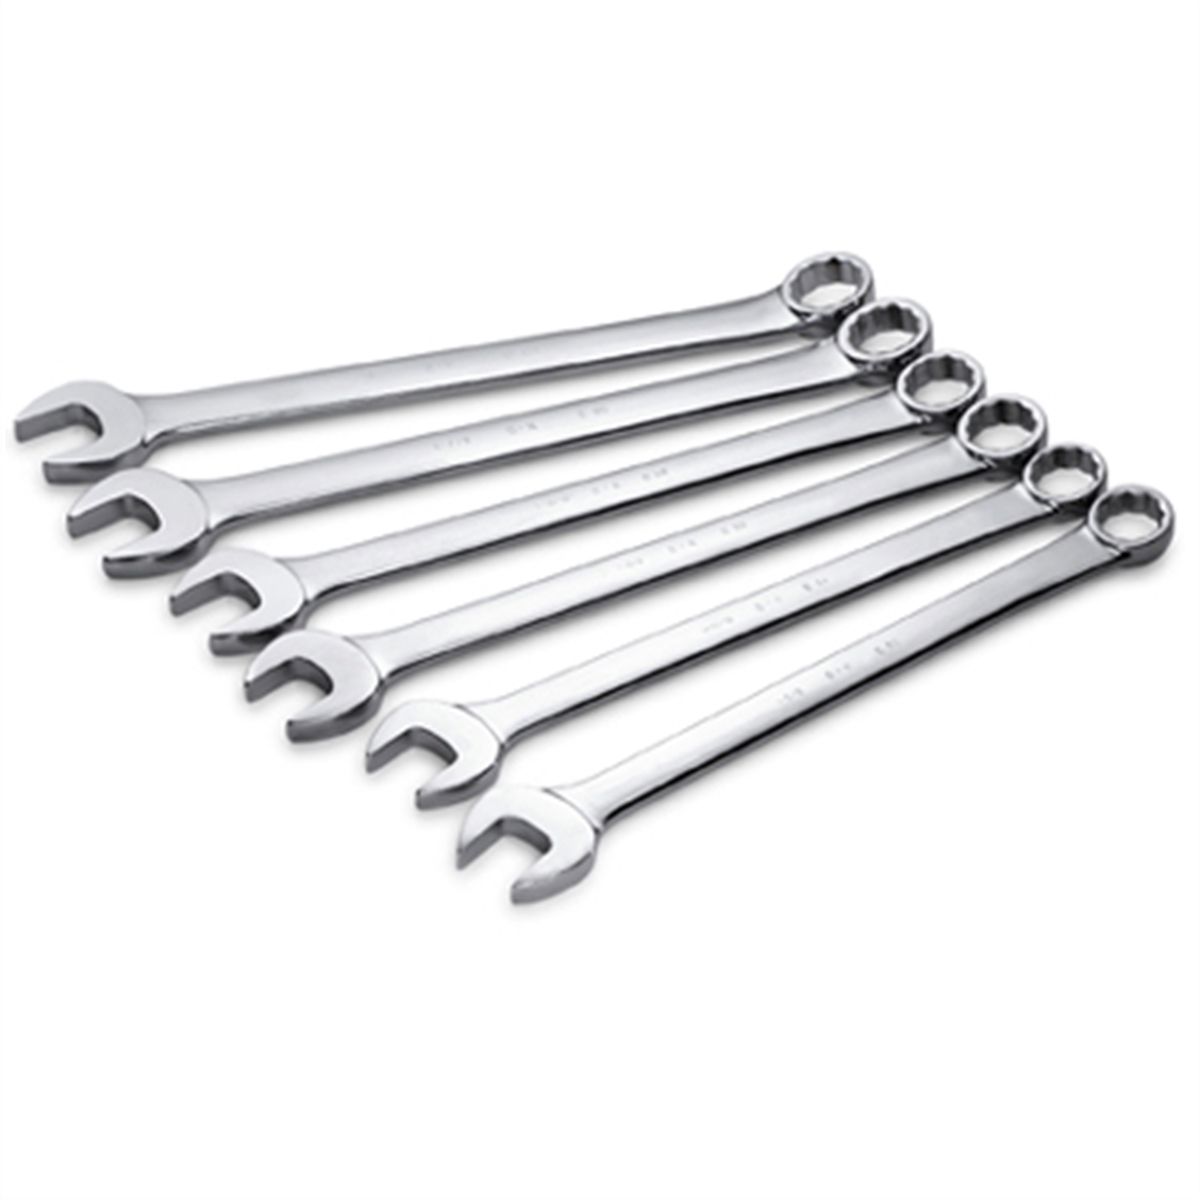 12 Pt Professional Fractional Combination Wrench Set - 6 Piece